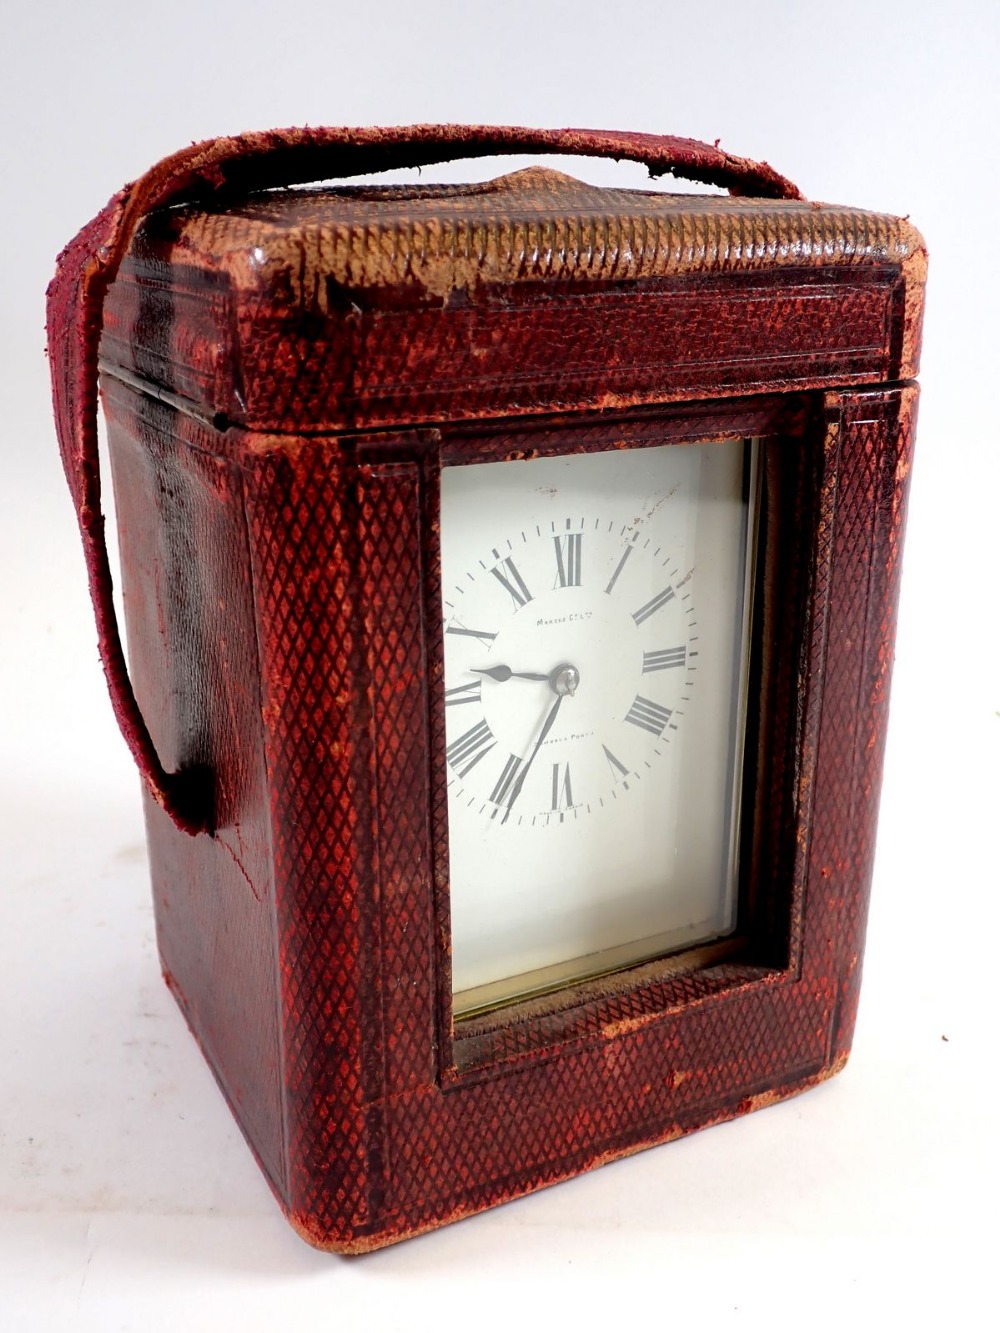 A brass carriage clock retailed by Marcks & Co Ltd, Bombay, presented to Mr Chatterton in Nagpur - Image 3 of 6